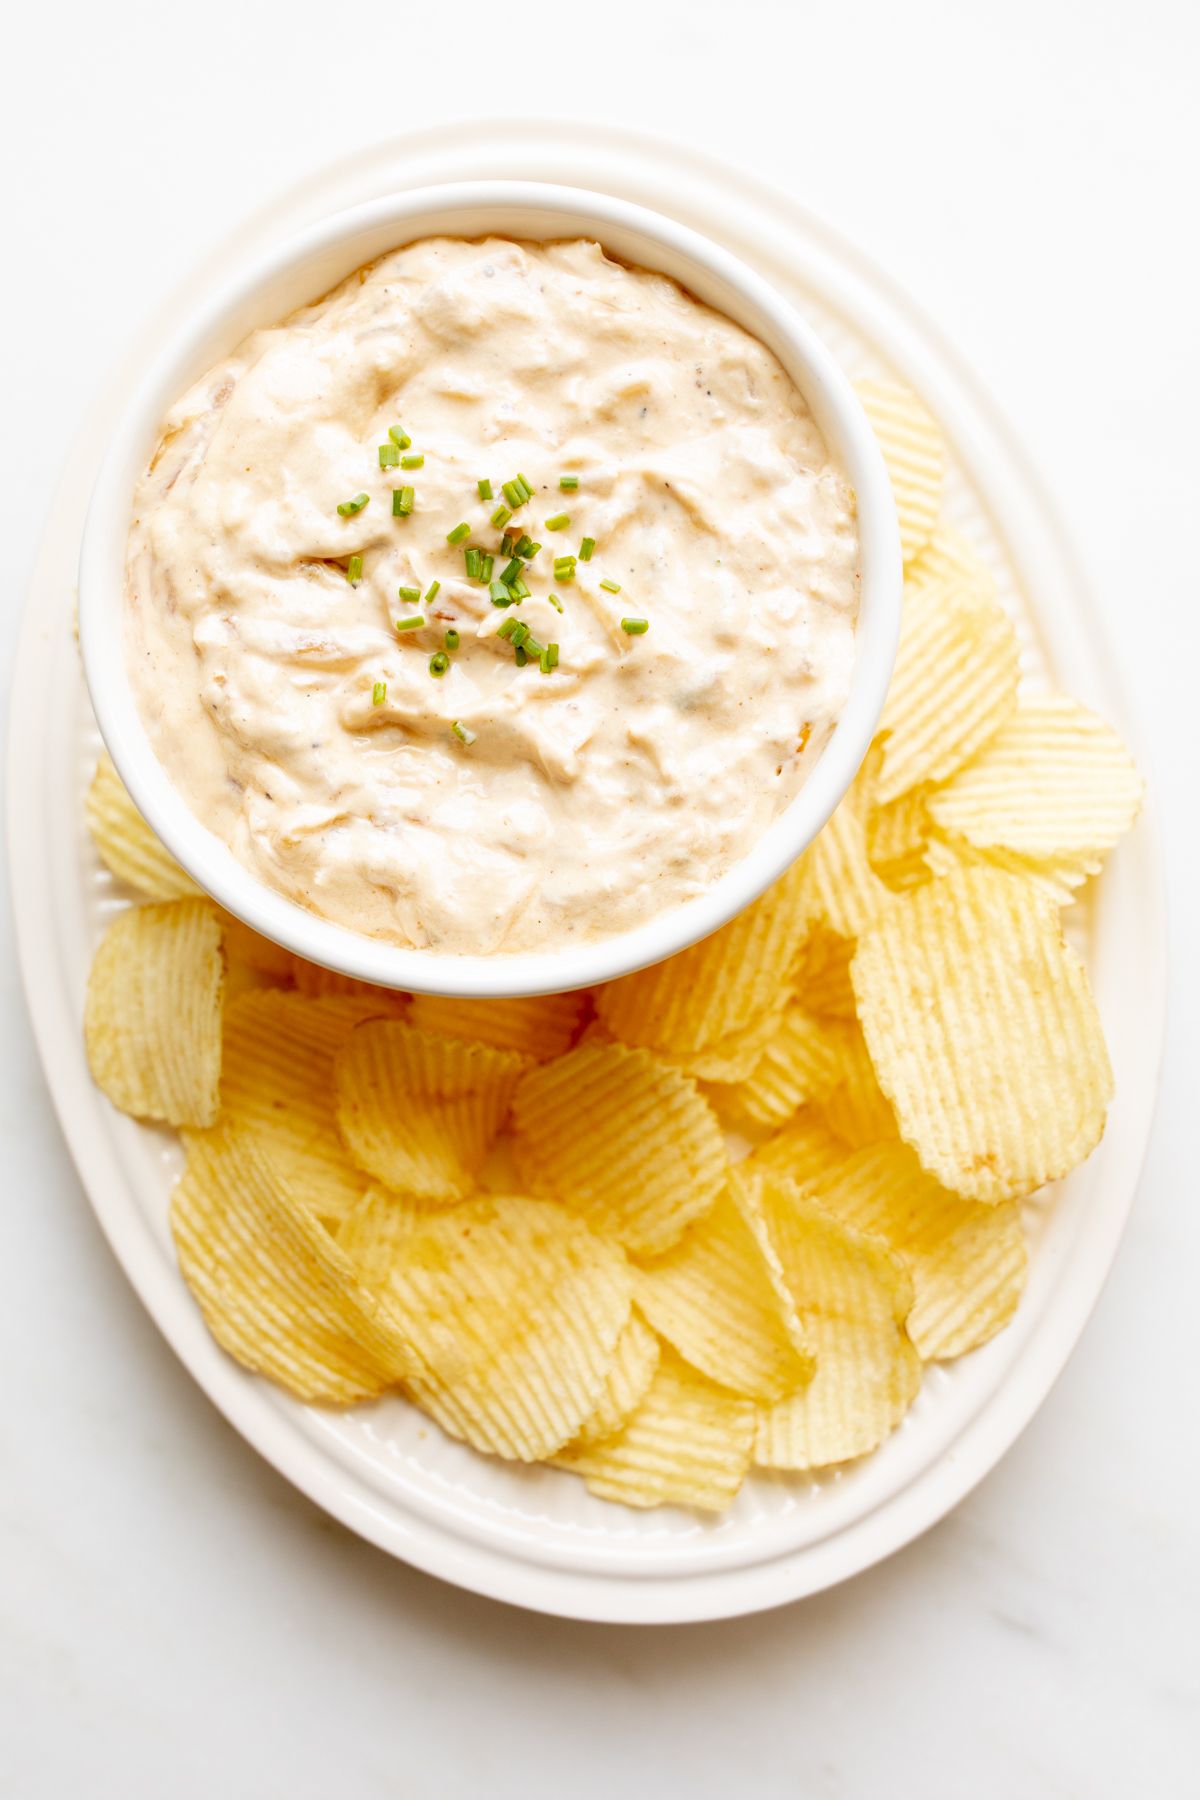 A bowl full of homemade french onion dip, surrounded by potato chips.